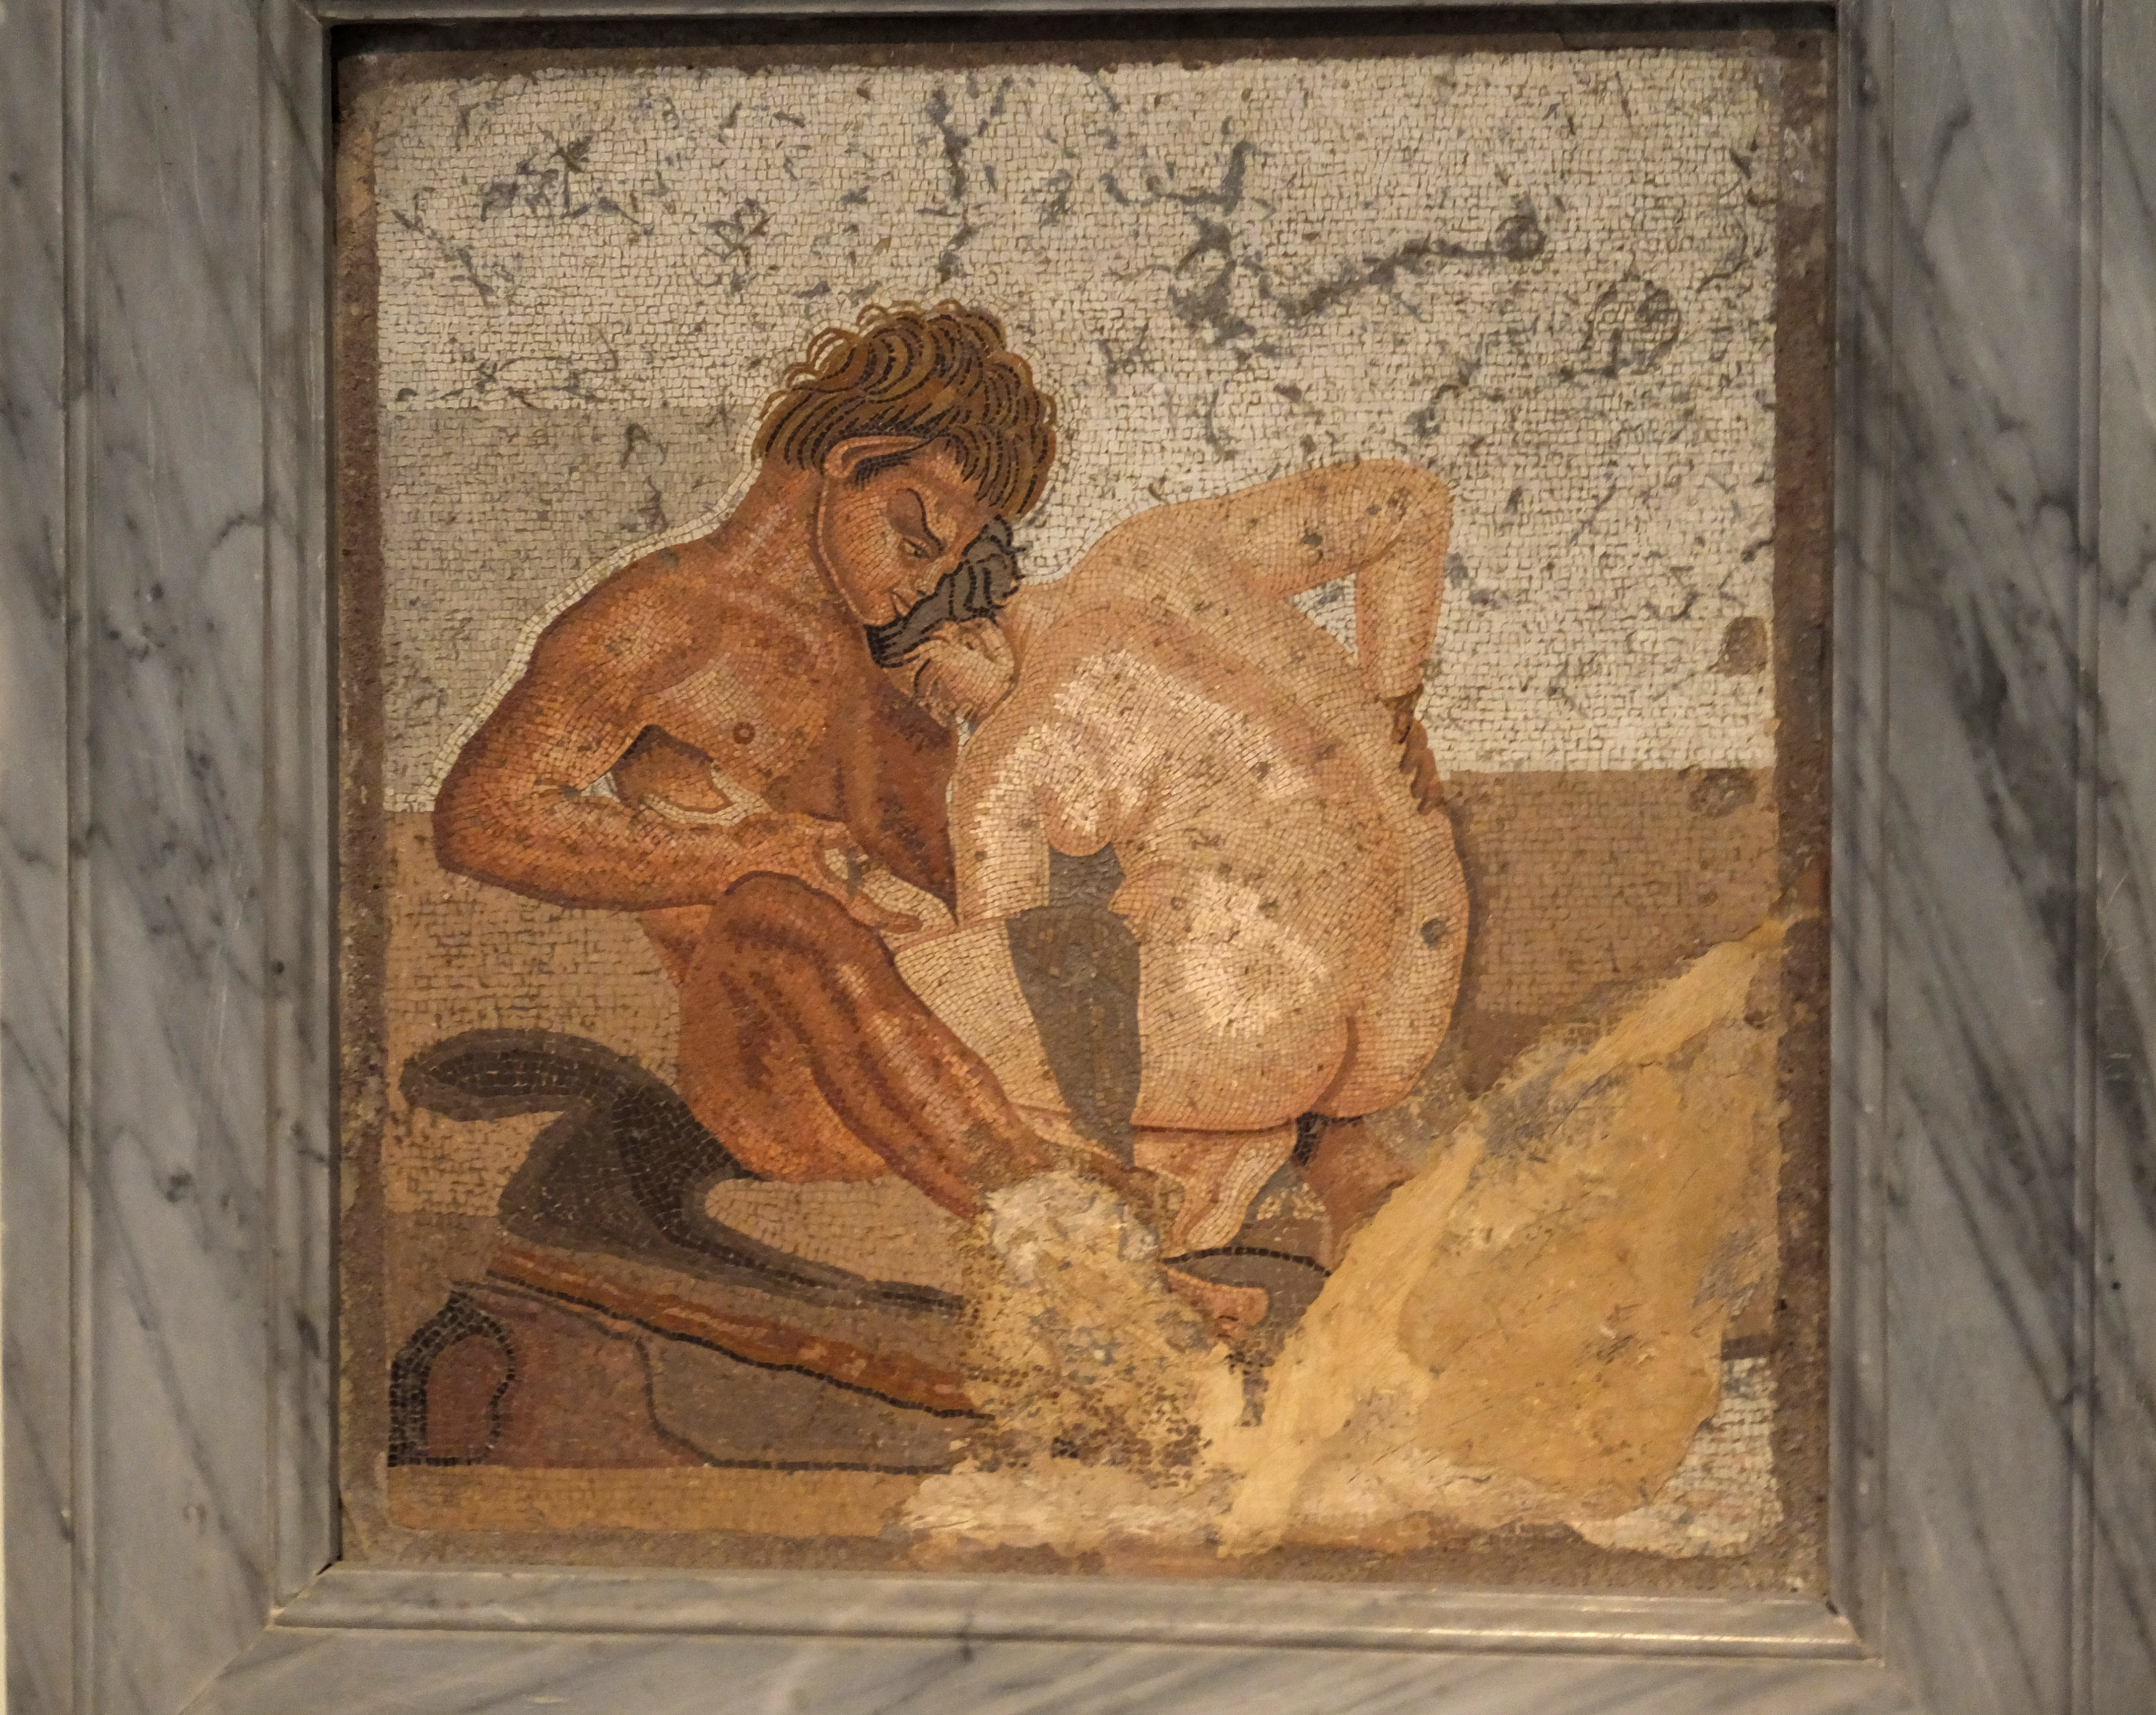 Euro Fuck Drunk Sex Orgy - Sexuality in ancient Rome - Wikipedia